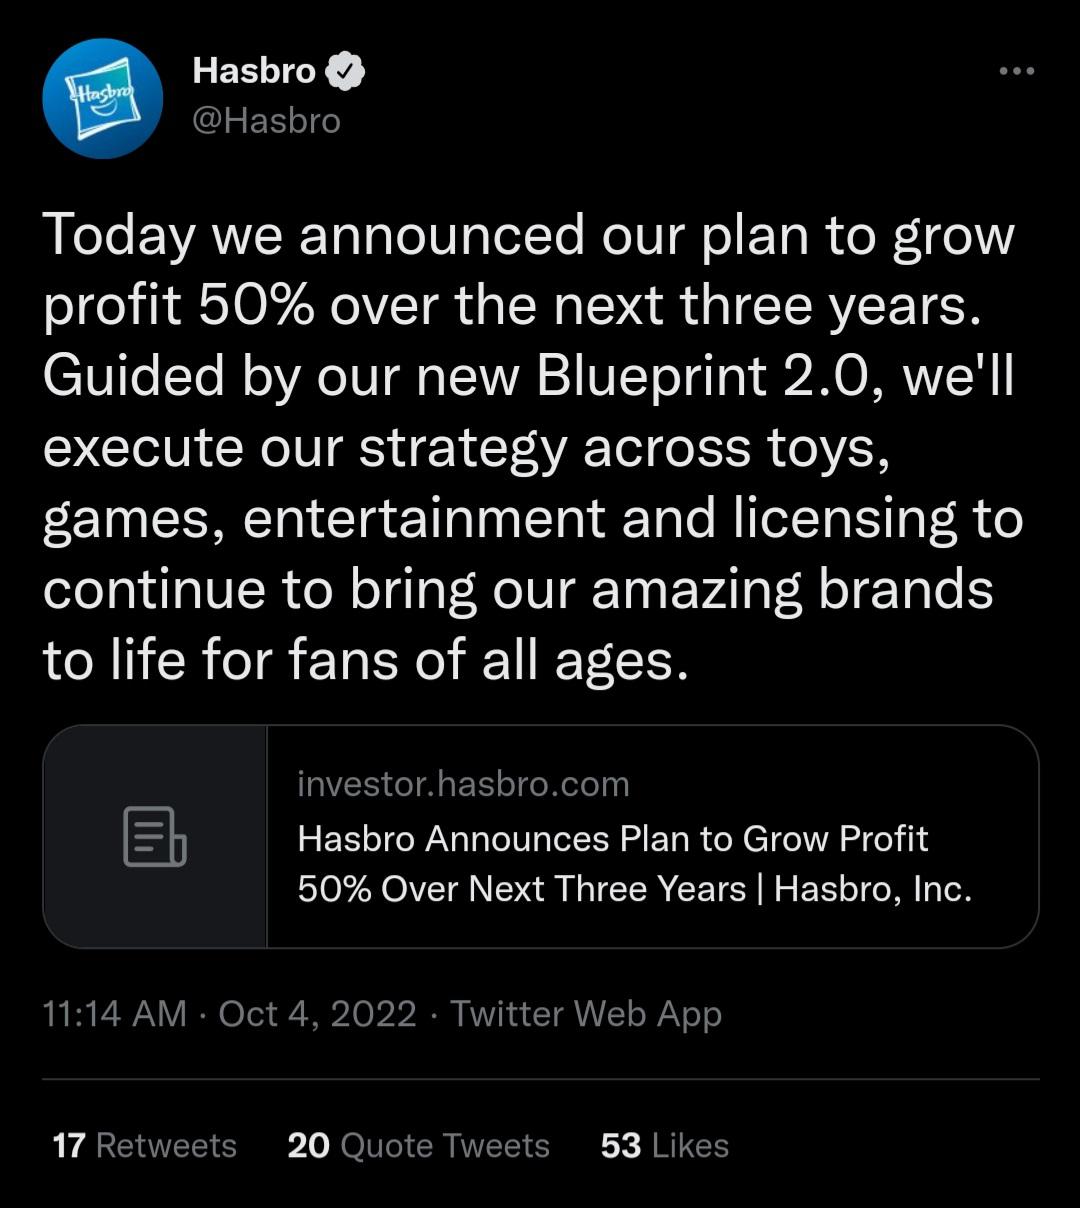 Tweet from Hasbro reading: Today we announced our plan to grow profit 50% over the next three years.